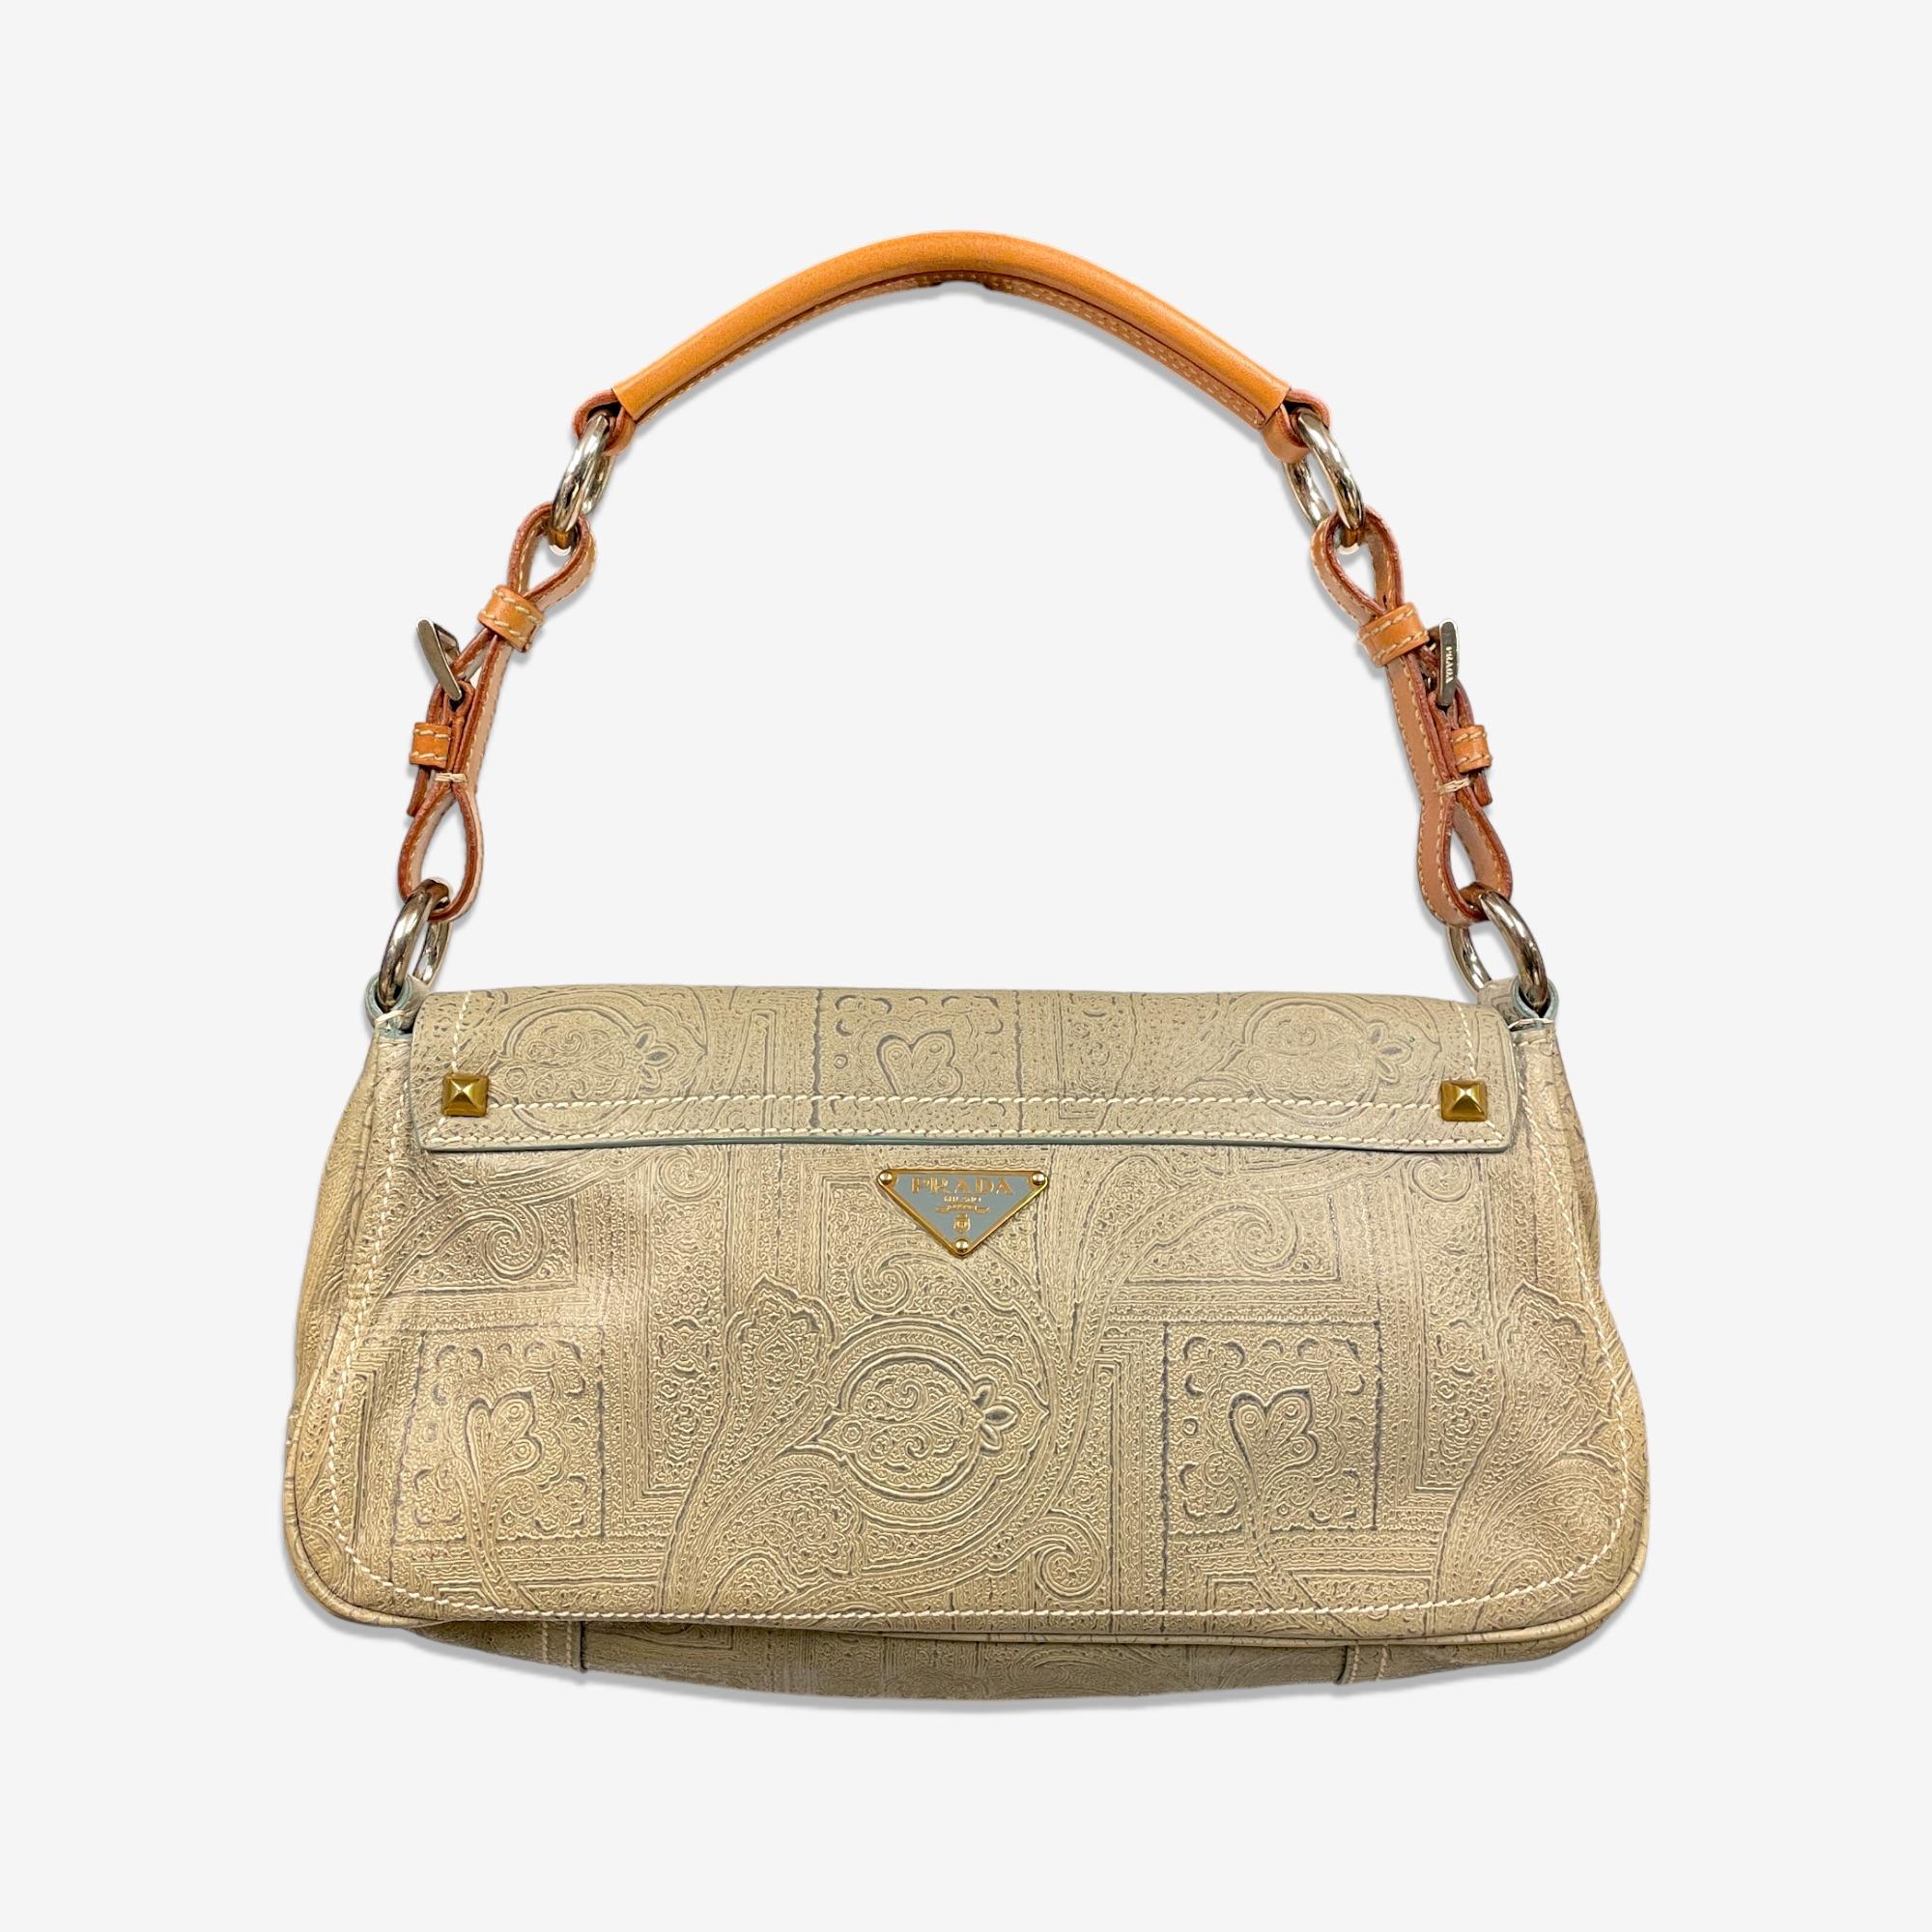 Prada Leather Shoulder Bag F/W 2004

F/W 2004

With original dustbag and card.

Measures: 30 x 16 cm

Materials: Line made of soft buffalo hide that has been tanned using traditional methods and impressed in bas-relief to obtain a distinctive